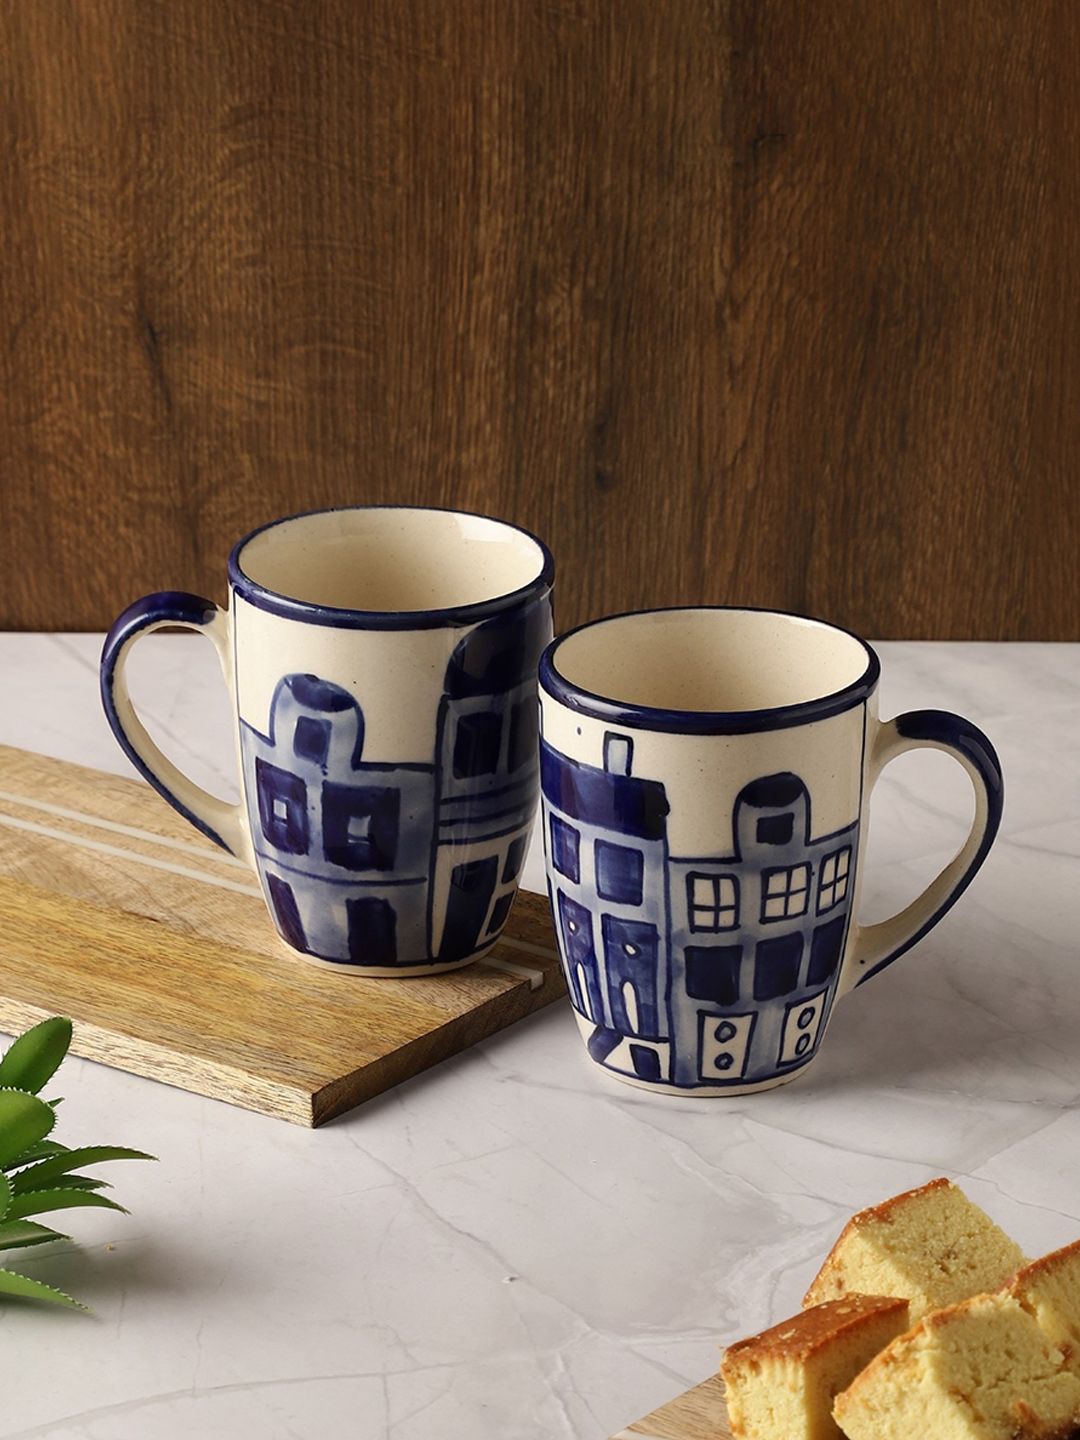 The Decor Mart Set of 2 Hand Painted Printed Ceramic Glossy Mugs Price in India